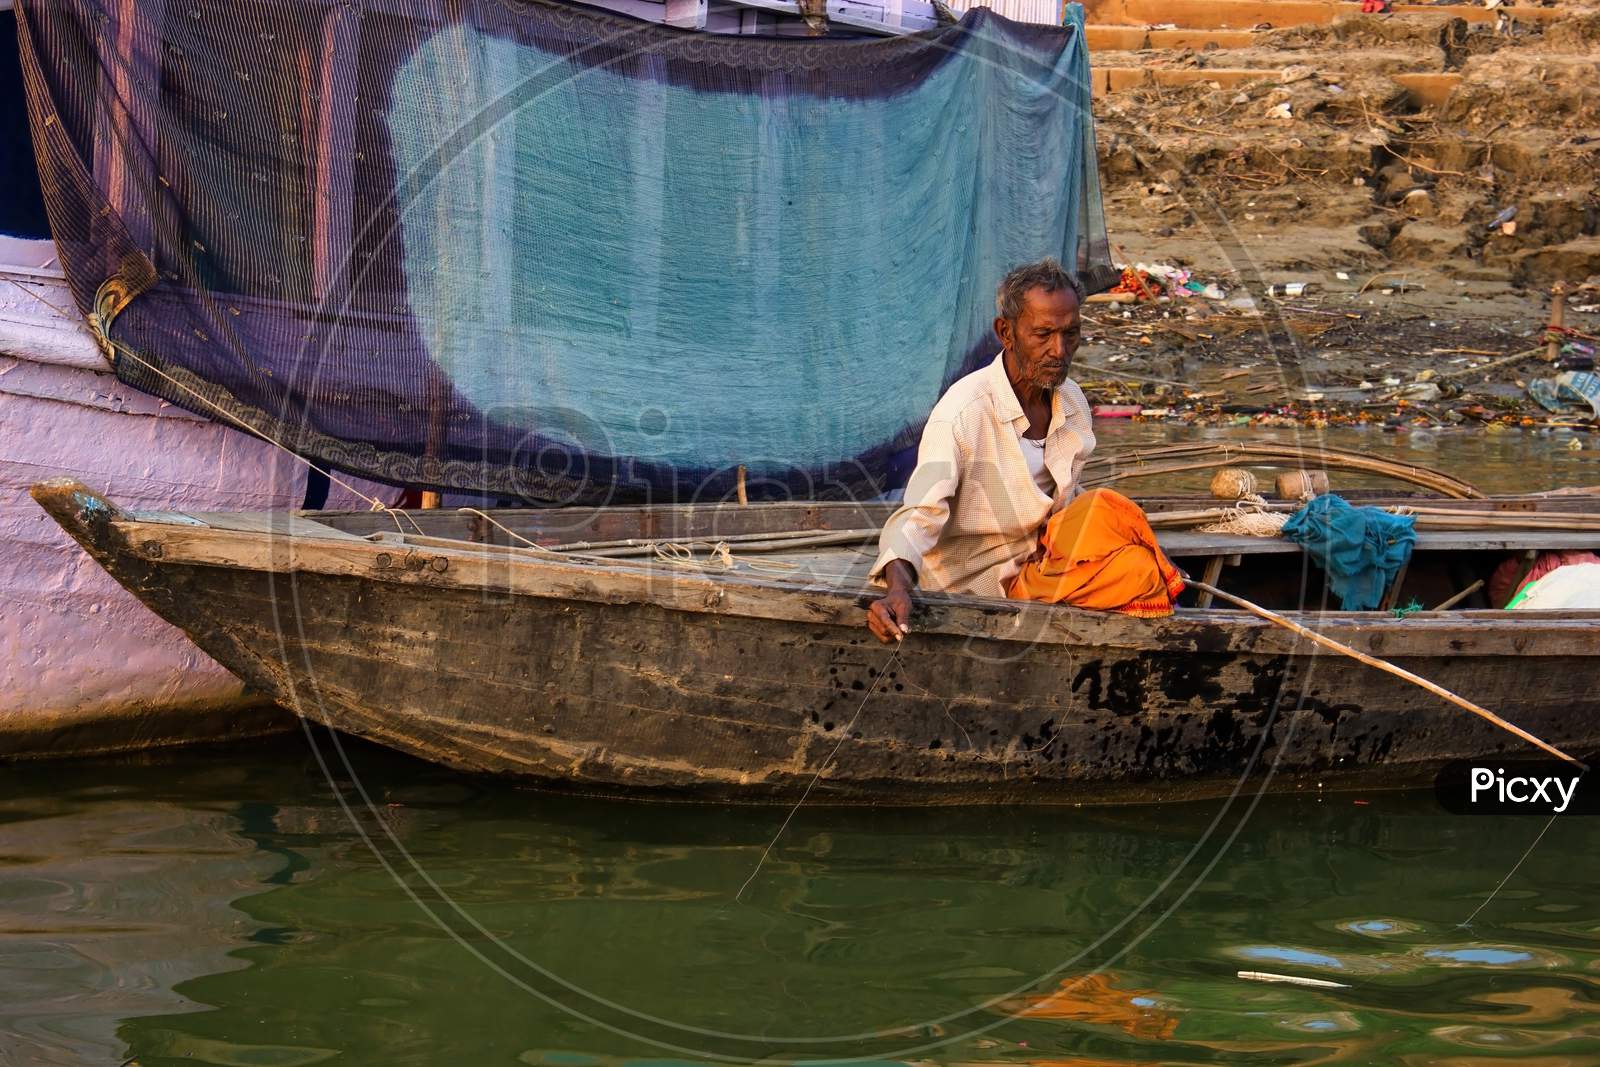 Varanasi, India - November 01, 2016: An Old Man Sitting Alone On A Wooden Boat Fishing For Living Against A Cloth Being Dried In The City Of Banaras Located In Uttar Pradesh State.